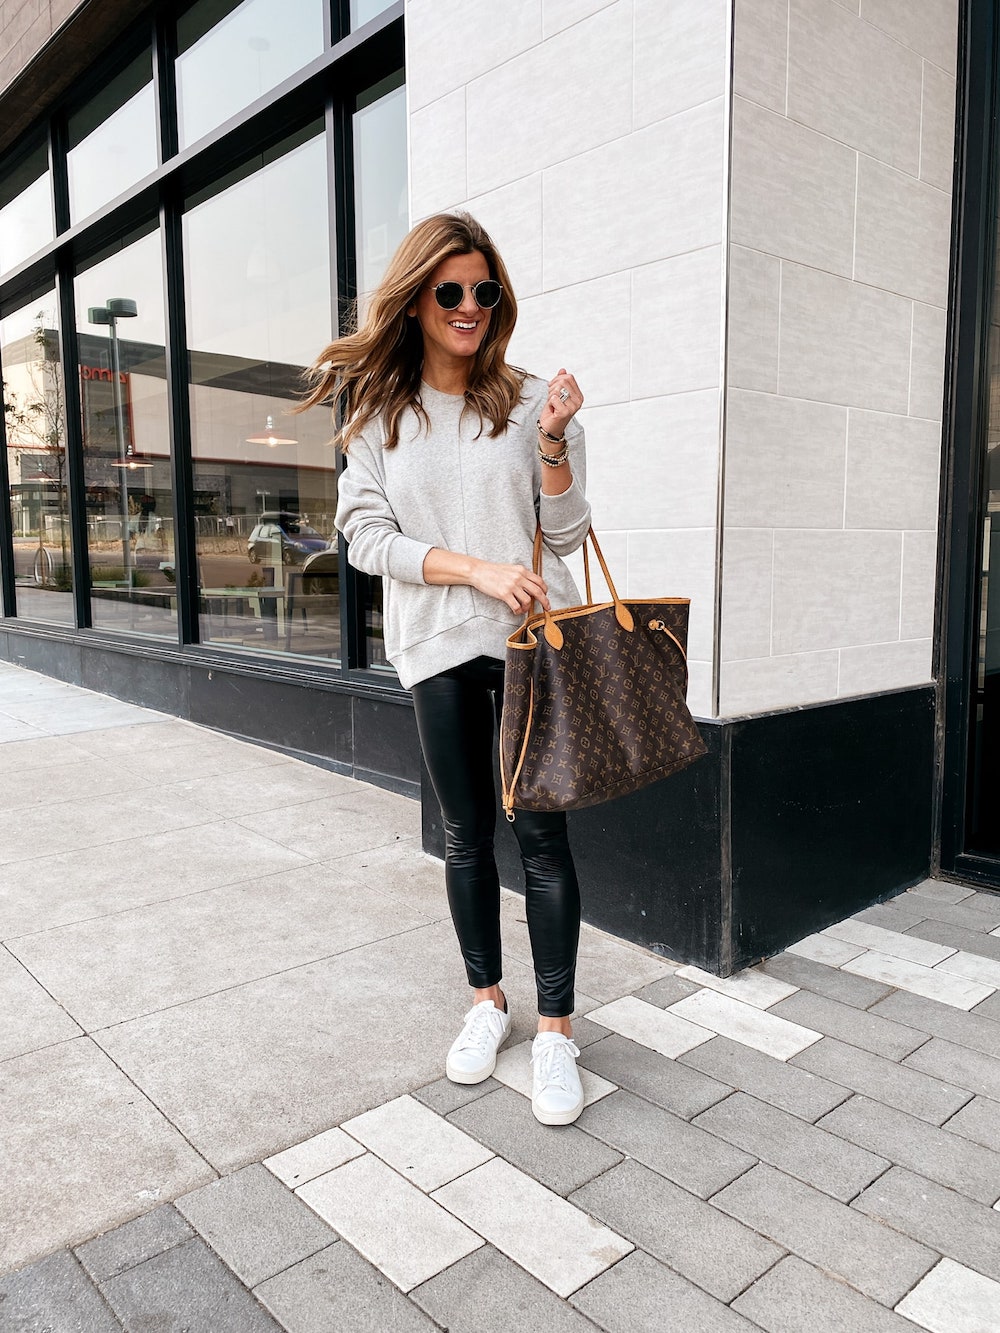 6 ways to wear your trusty white sneakers this week